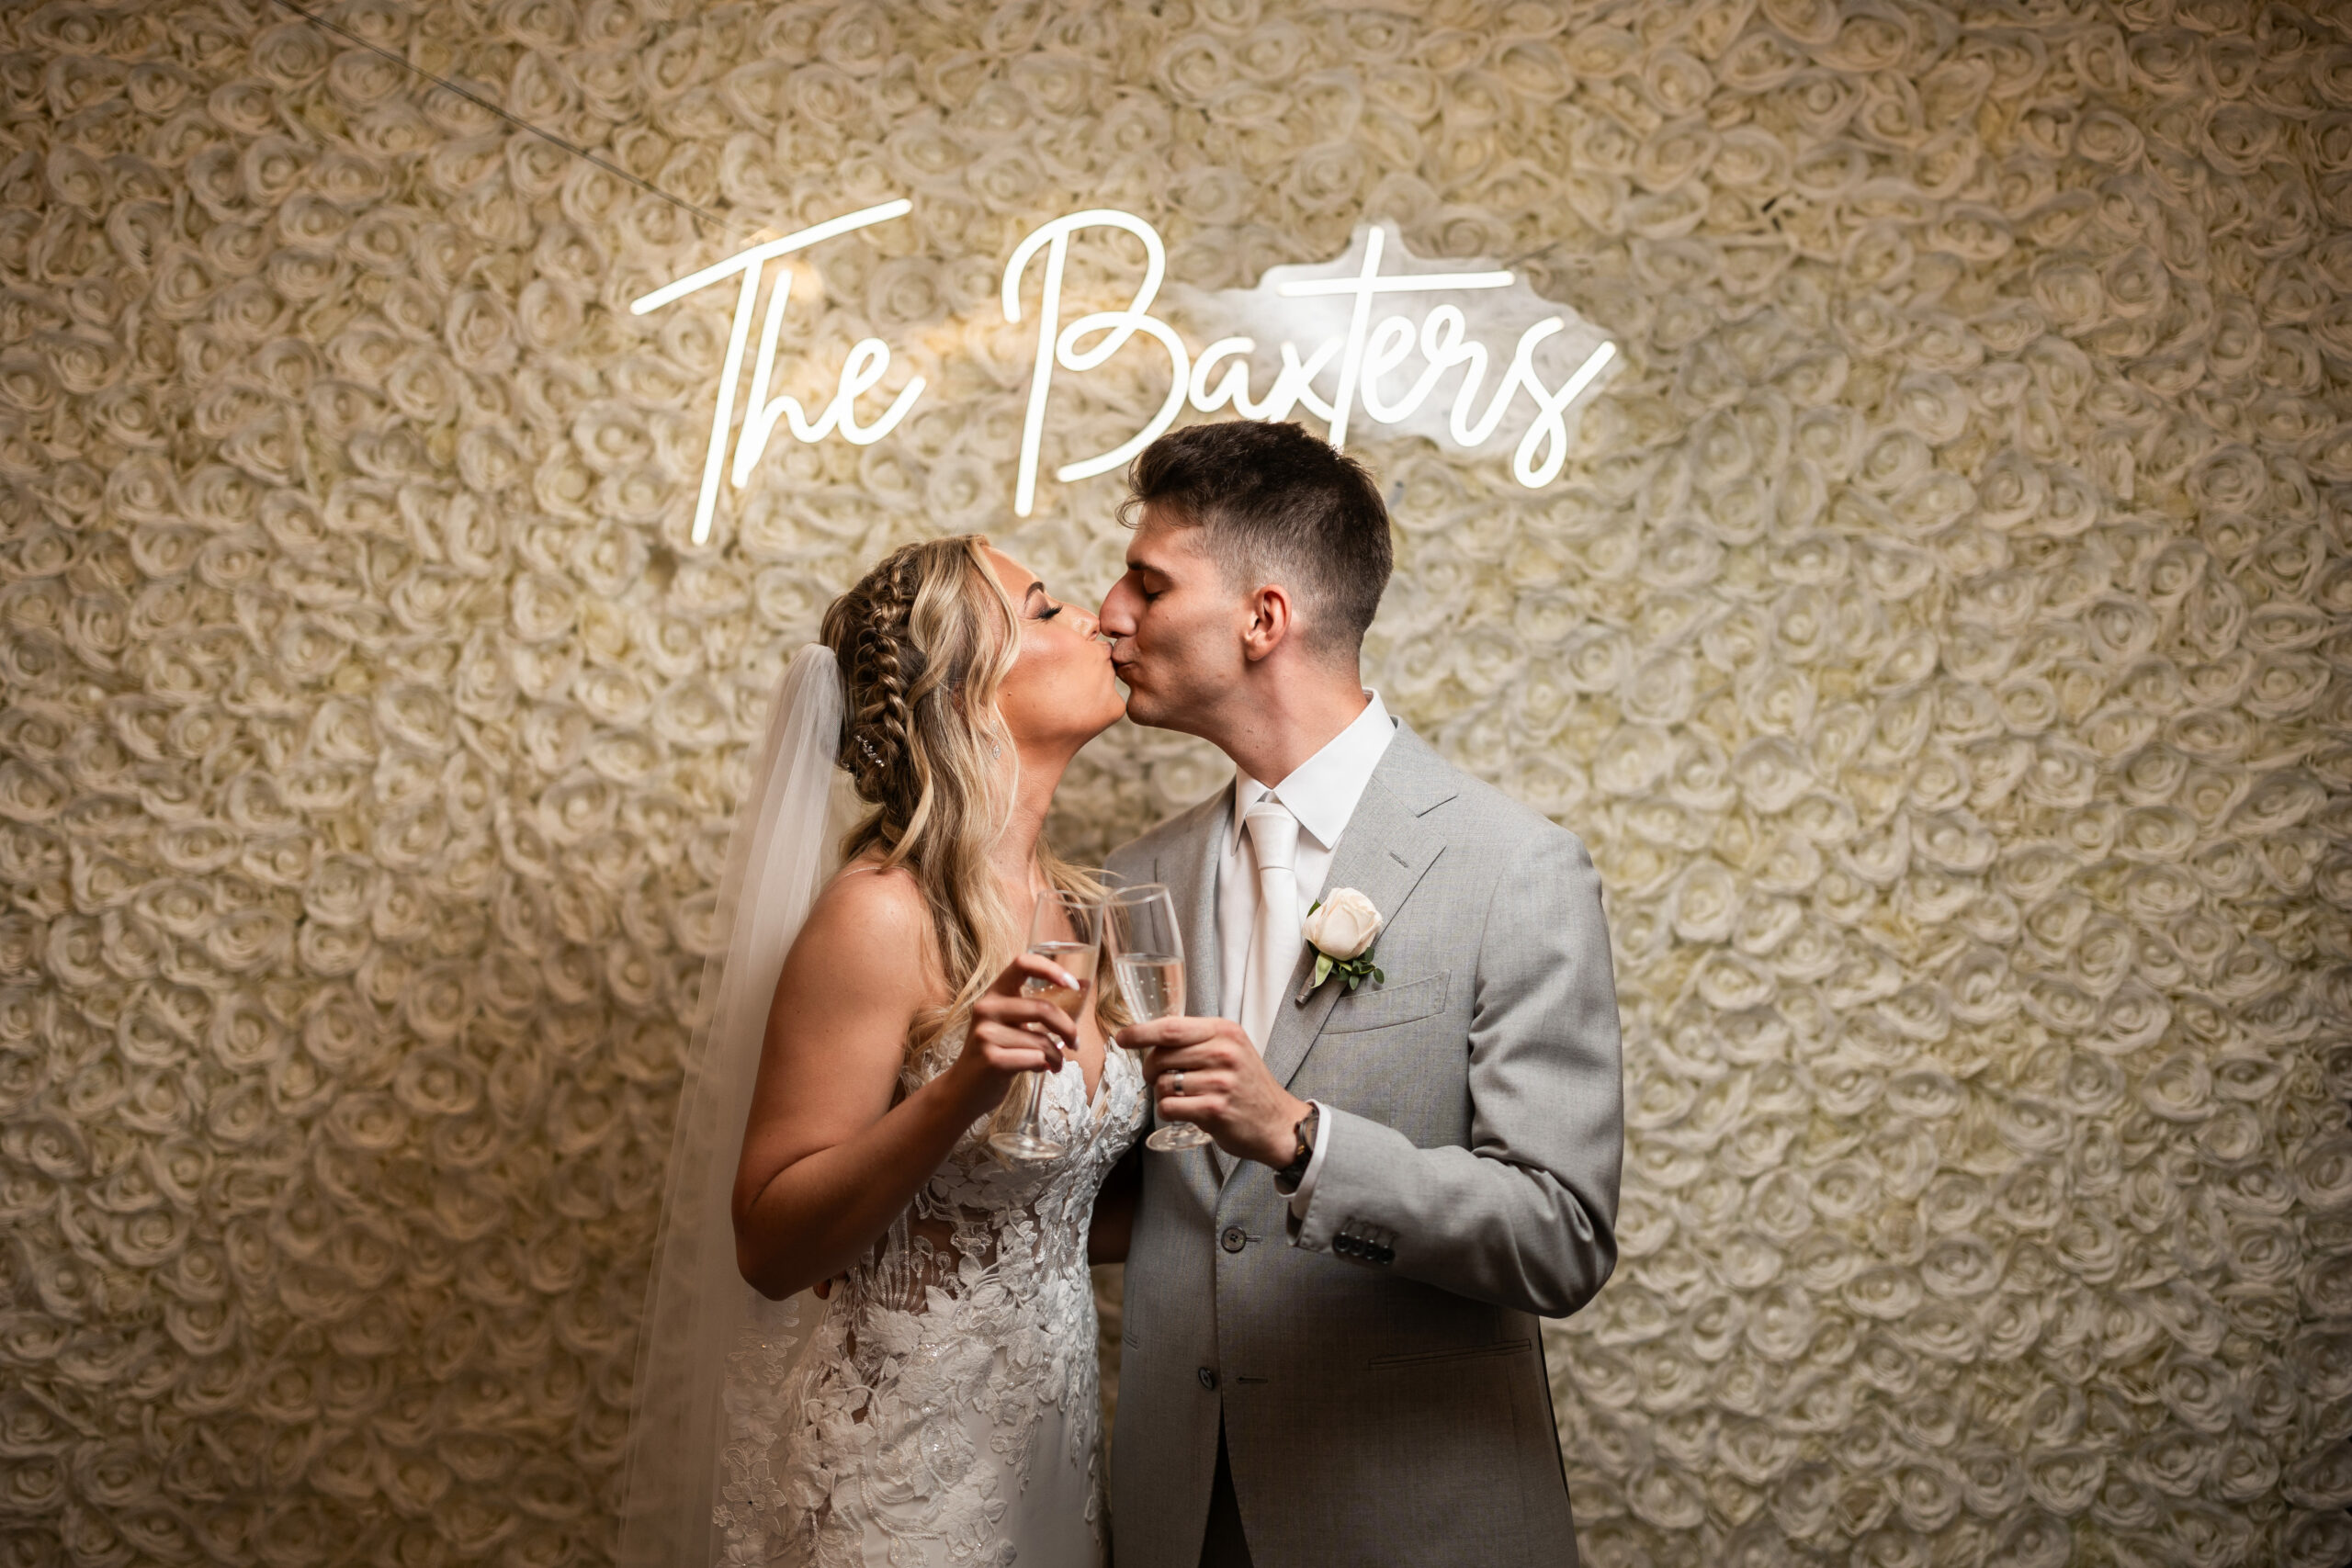 A loving couple shares a kiss after their ceremony, standing before a stunning flower wall with their names displayed in a neon sign. This heartwarming moment was beautifully captured by Jarot Bocanegra Photography